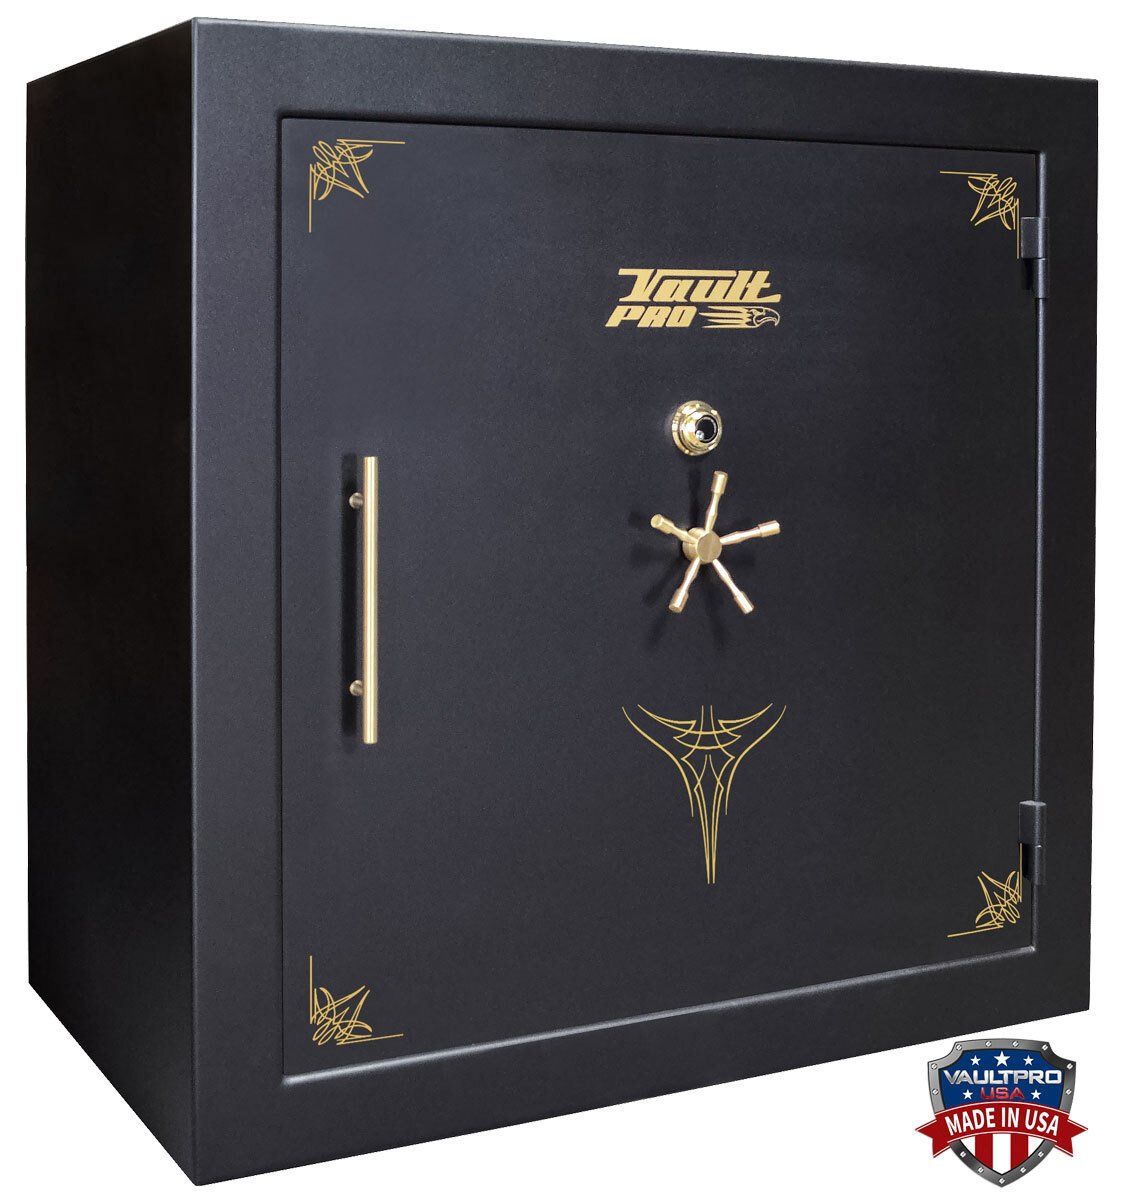 Very big gun safes for large gun collections made in USA